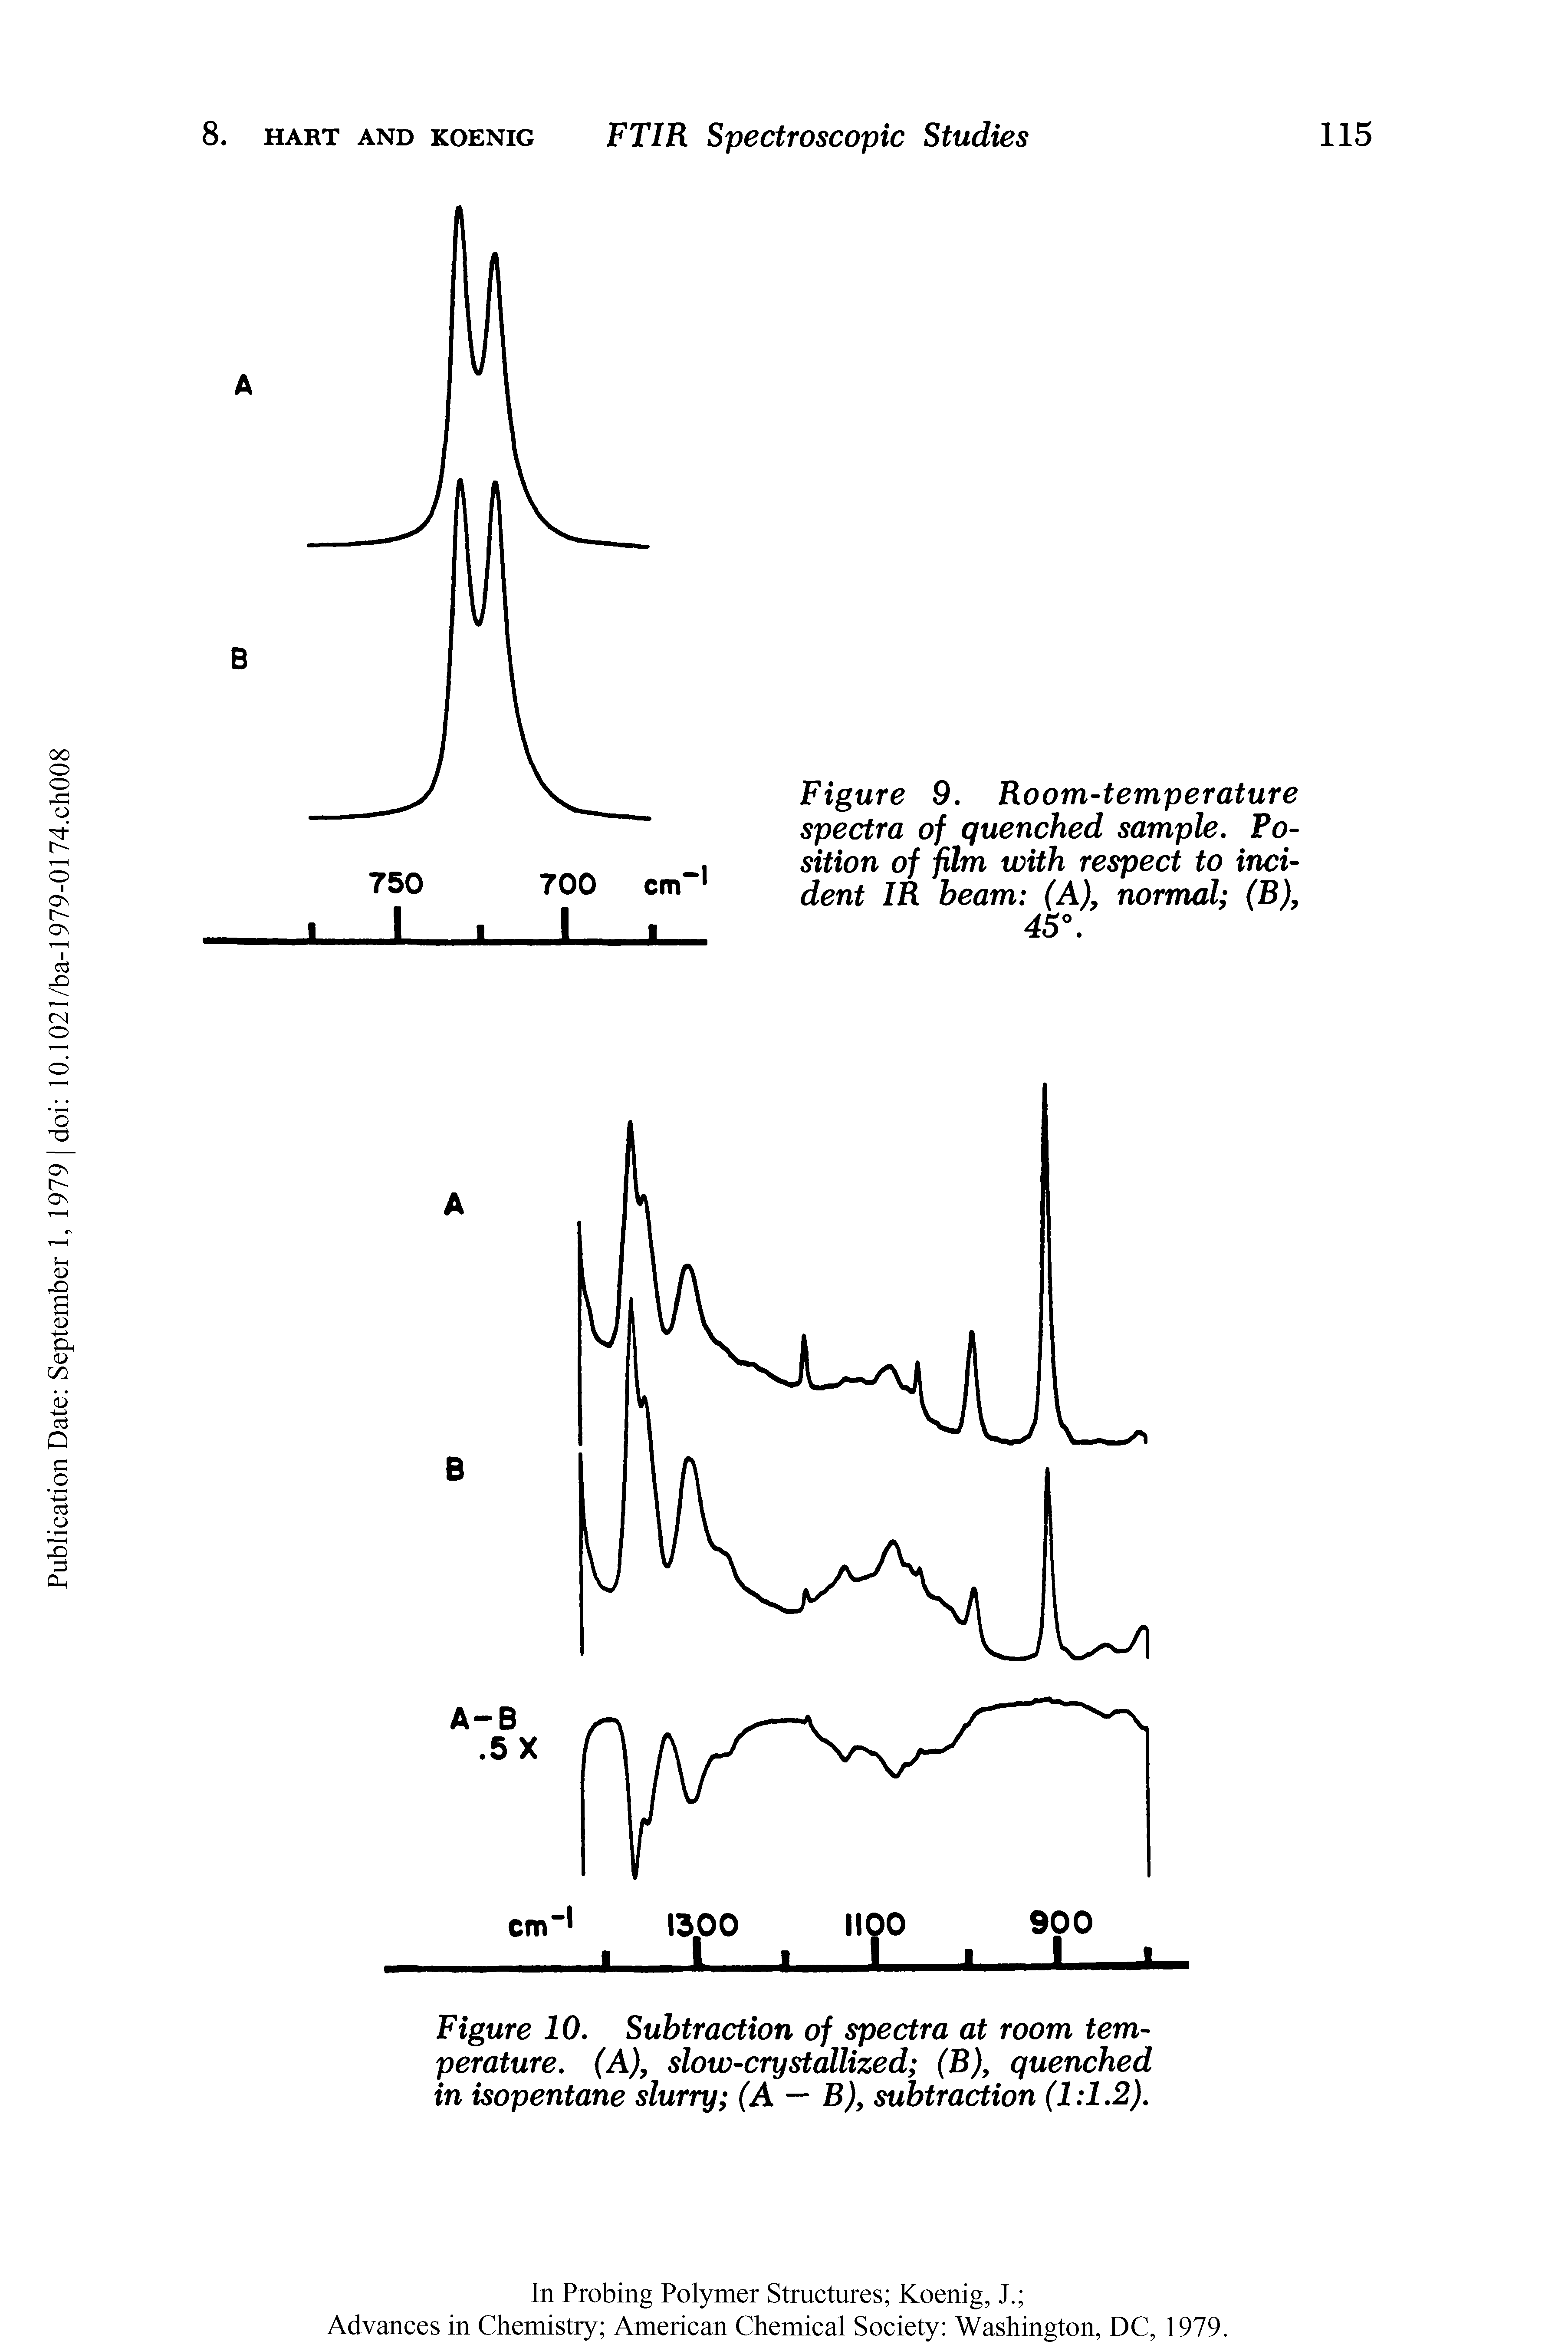 Figure 10. Subtraction of spectra at room temperature. (A), slow-crystallized (B), quenched in isopentane slurry (A — B), subtraction (1 1.2).